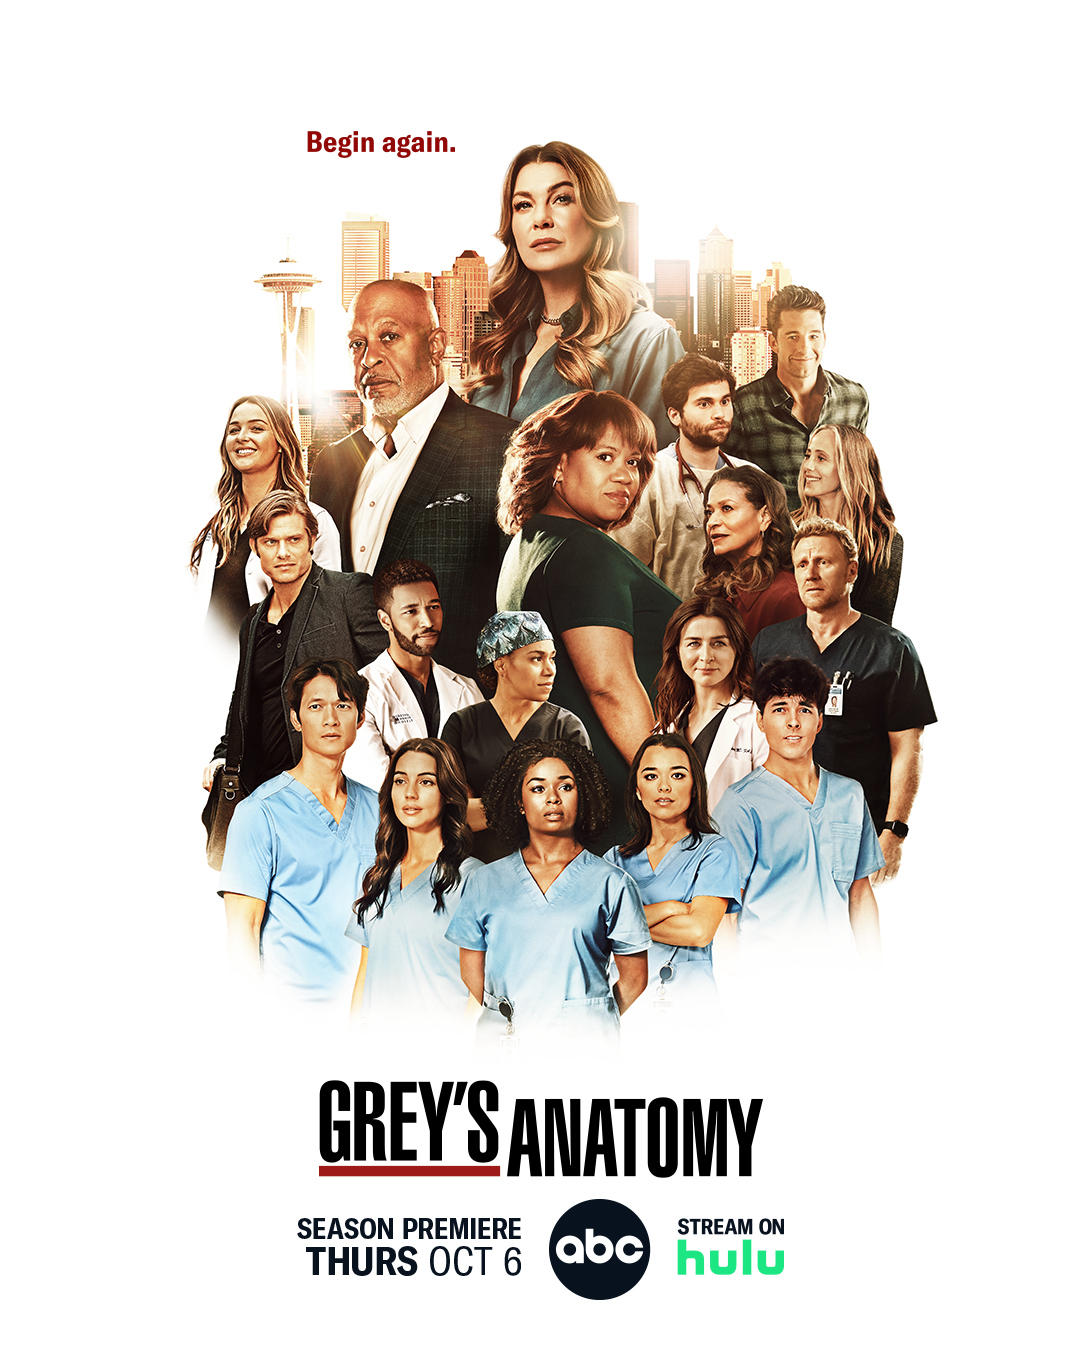 Grey's Anatomy Official - An opportunity for new beginnings